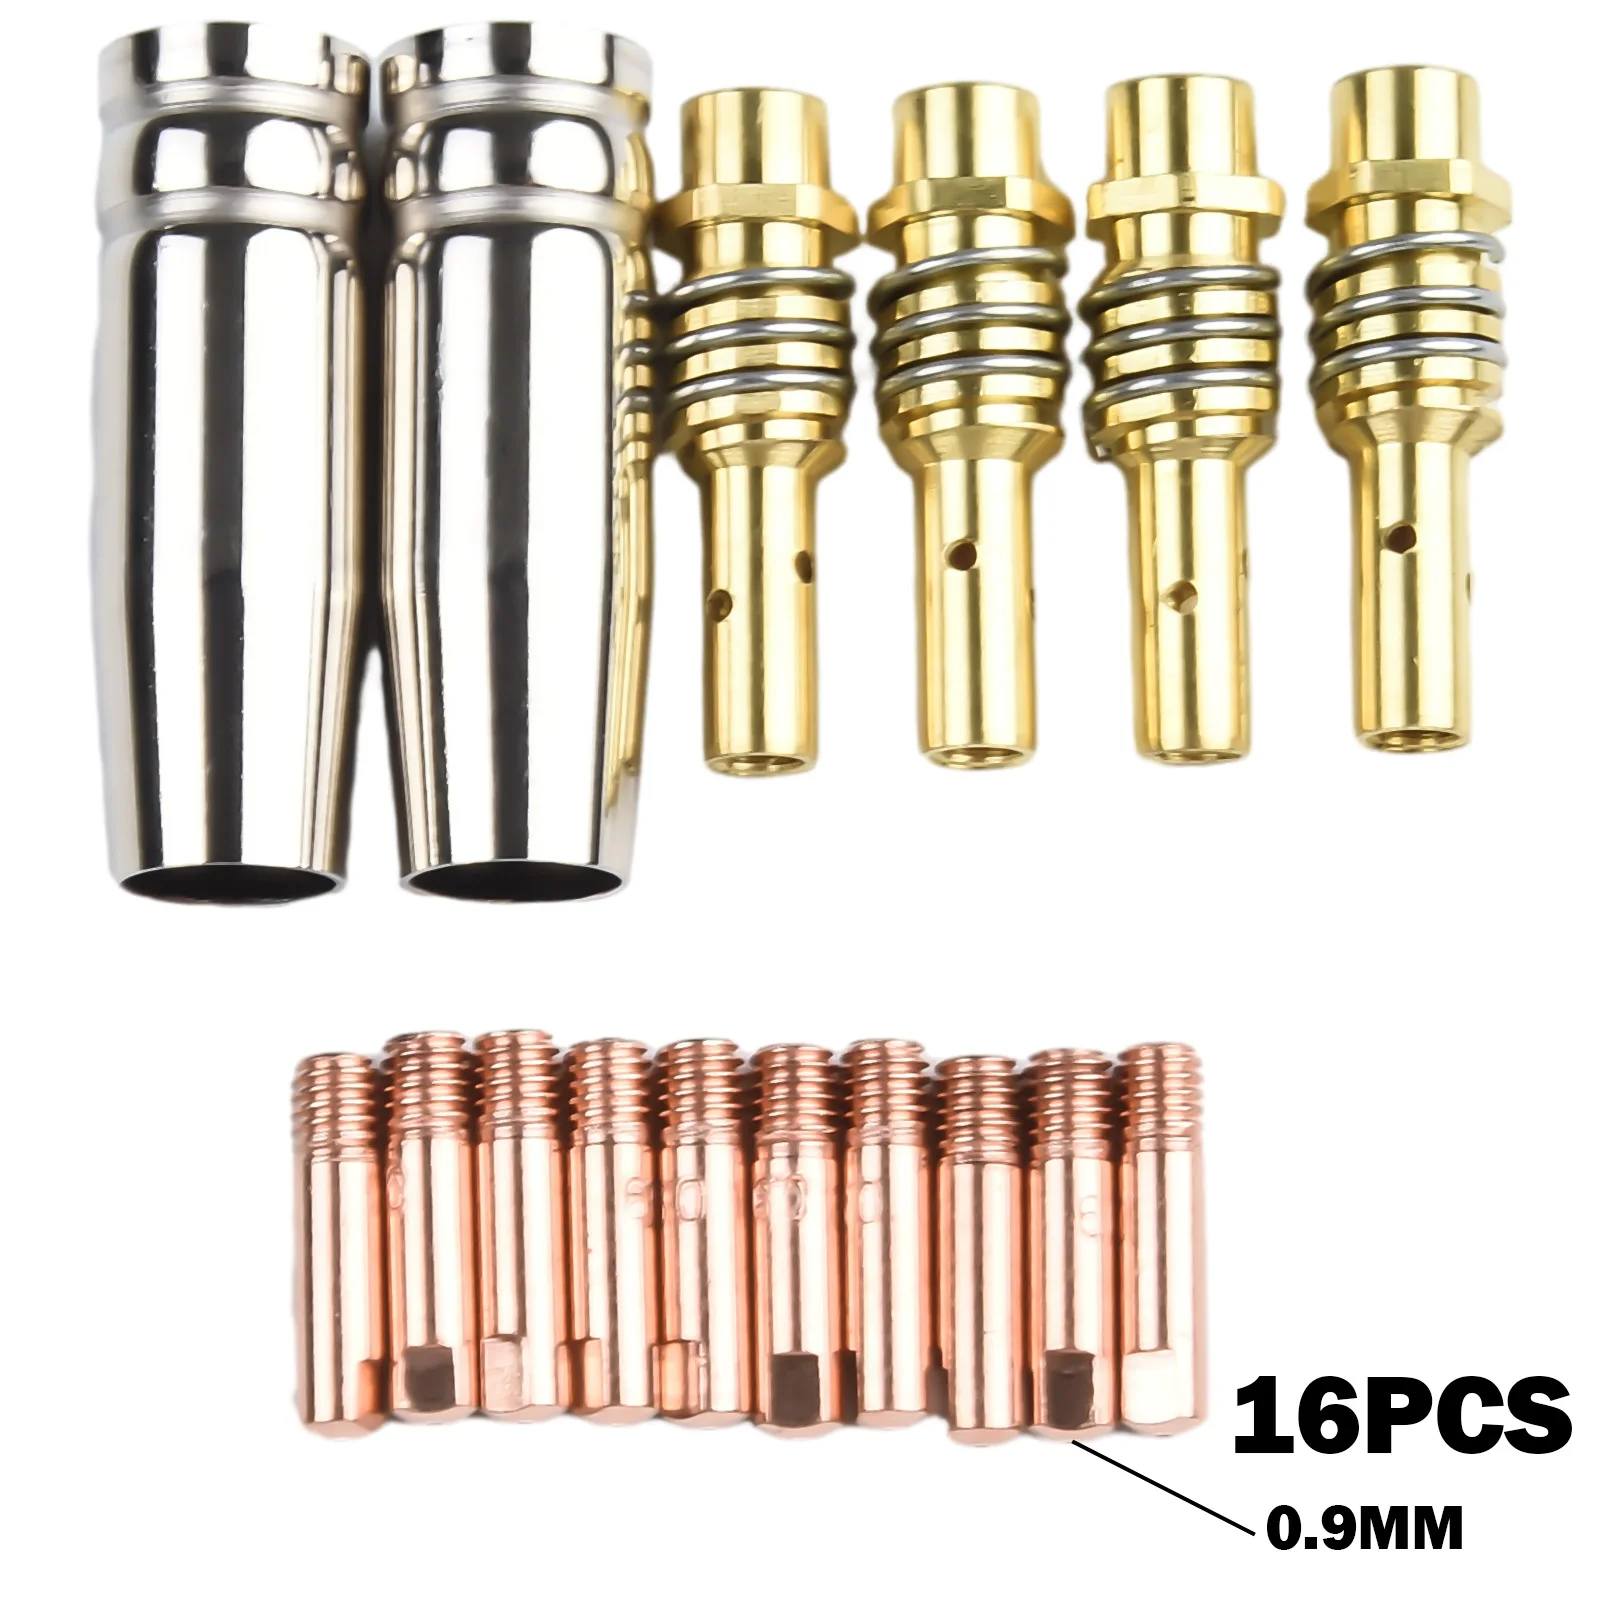 Mig Contact Tip Consumables 16PC MIG Welding MB15 15AK Contact Tip 0.8/1.0/1.2mm Conductive Tips Protective Nozzles Tip Holder 10pcs mig contact tip welder nozzles kit mb15 15ak conductive tip contact tips mig welding torch welding 0 6 0 8 0 9 1 0 1 2mm